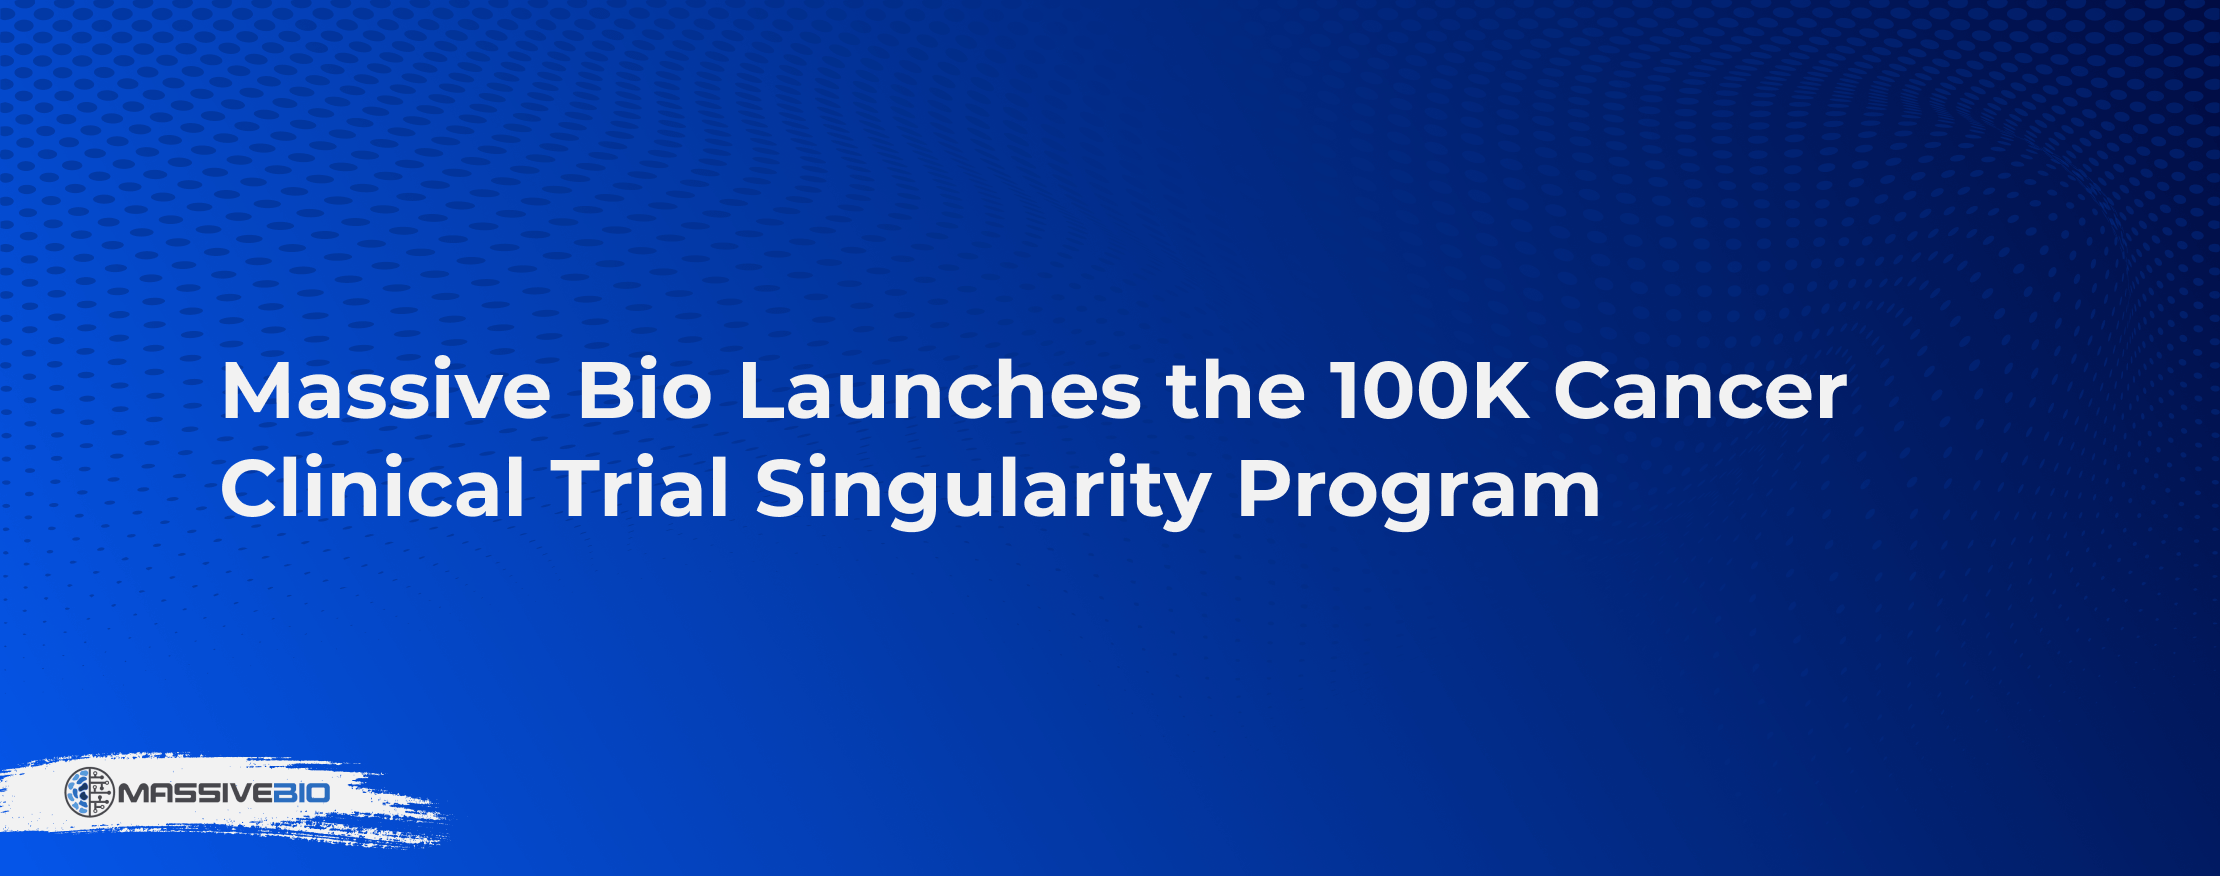 Massive Bio Launches the 100K Cancer Clinical Trial Singularity Program